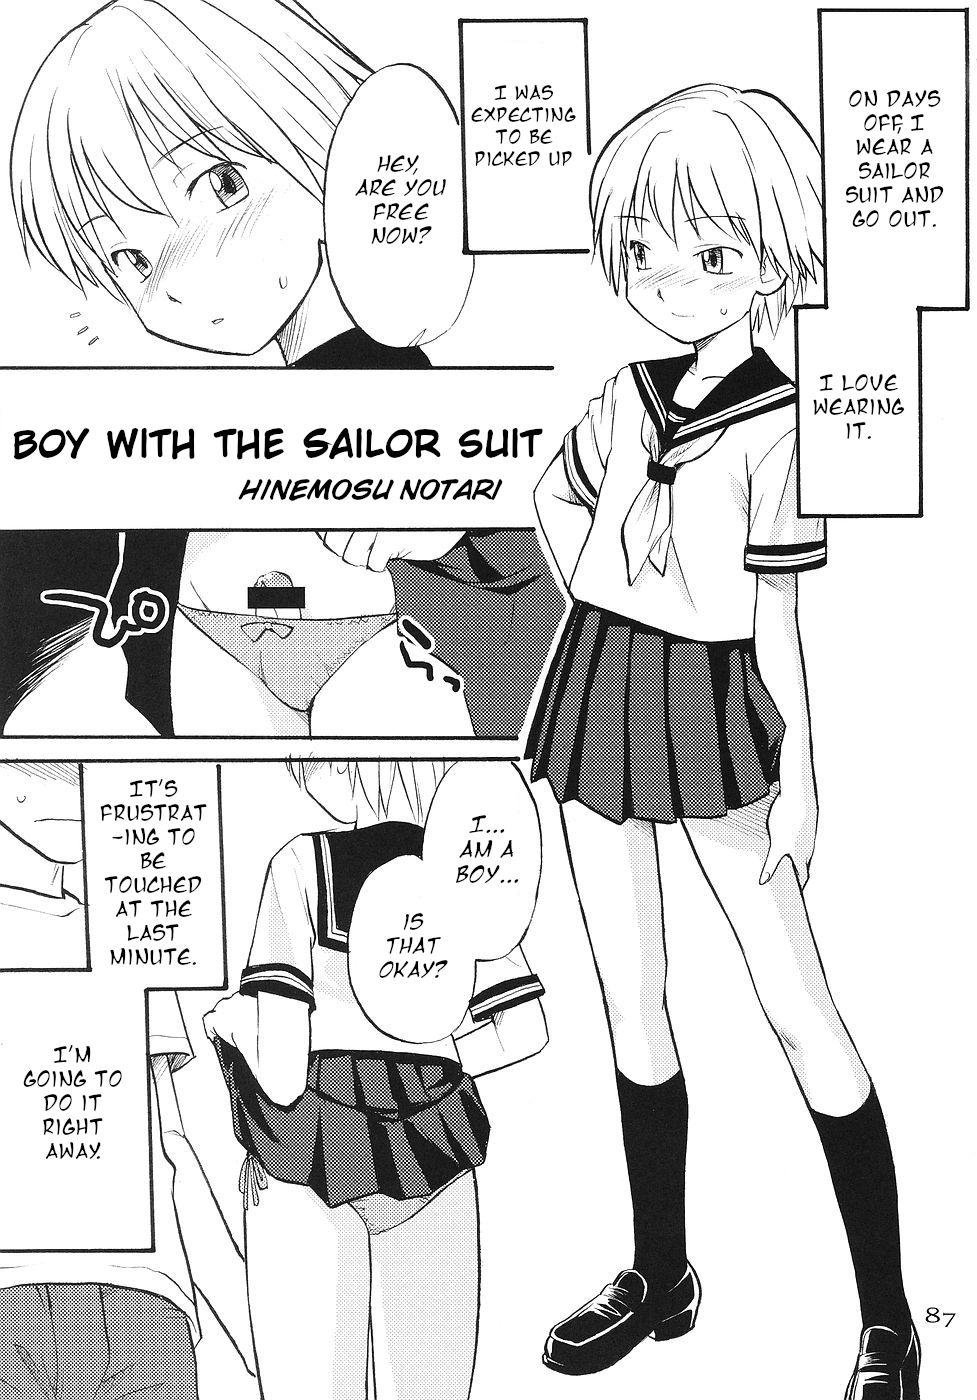 Sucking Cocks Boy with the Sailor Suit Street Fuck - Page 1